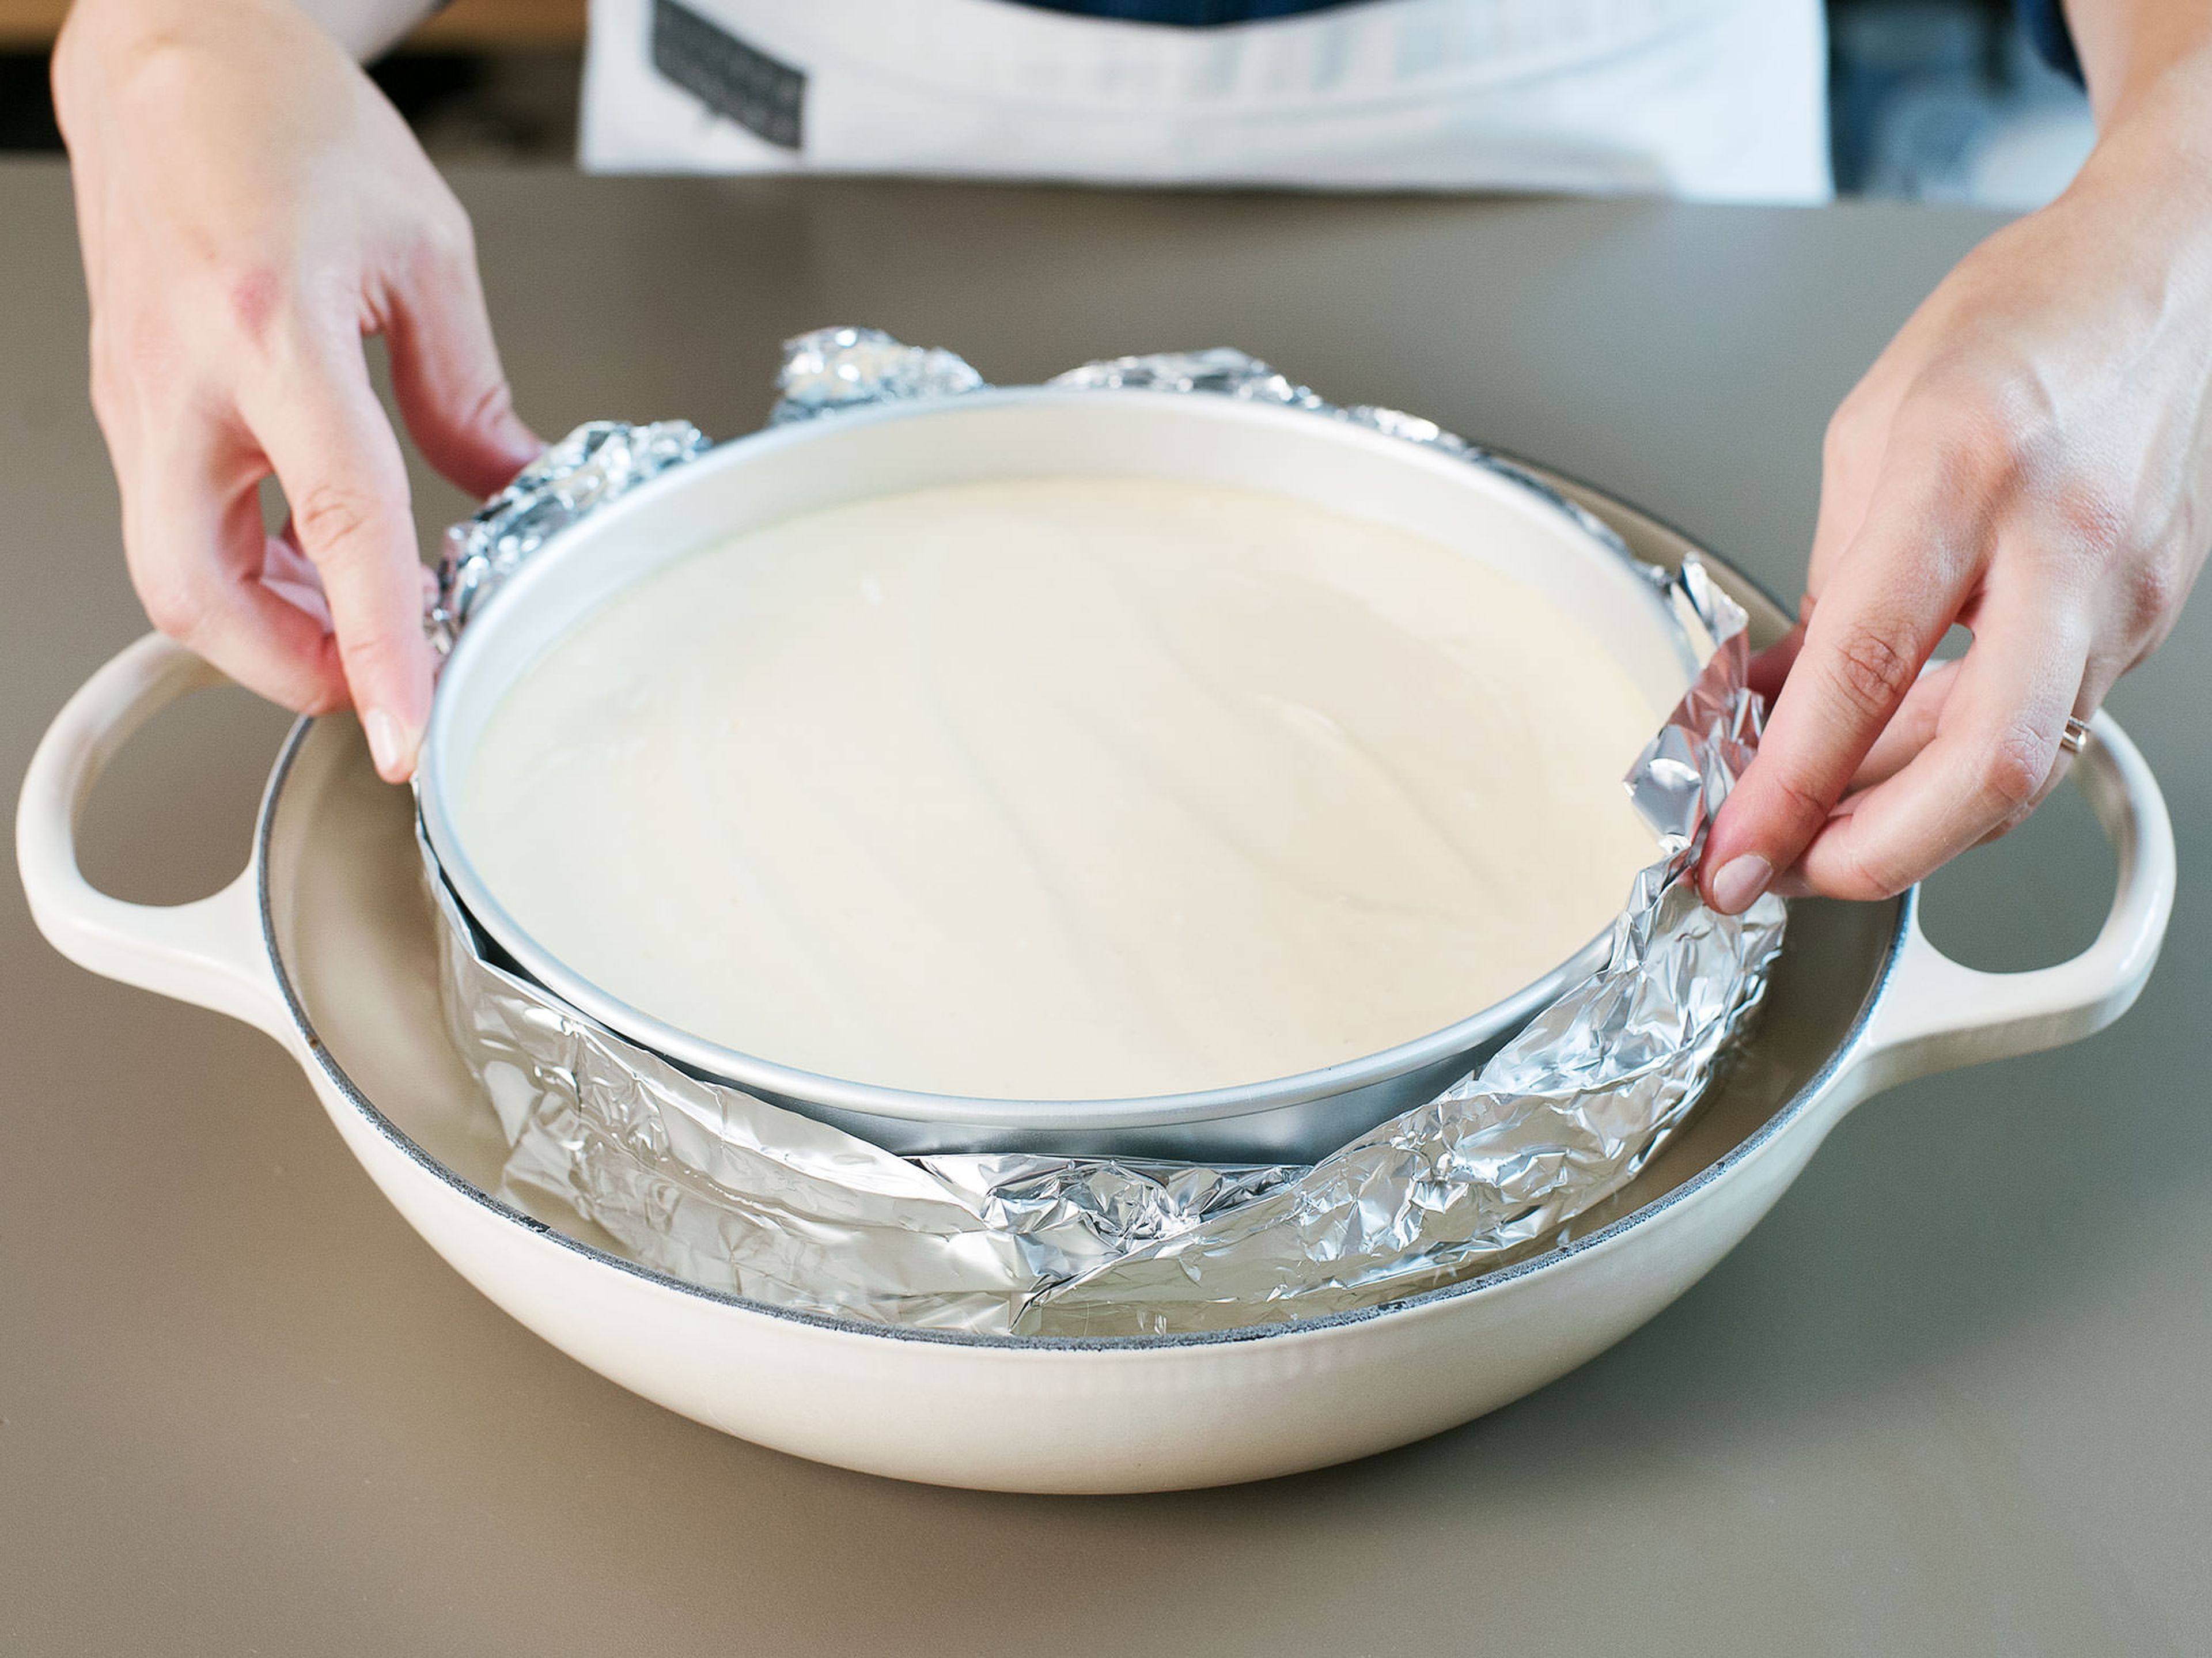 Place cake pan into a deep baking dish and fill with approx. 2 cm./1 in. of boiling water so that the bottom of the pan is submerged. Bake on lowest rack of oven at 160°C/320°F for approx. 50 min. Check on the cheesecake after 30 min. and cover with parchment paper if the top of the cake is getting too dark. When cake is done baking, remove the aluminum foil from the pan. Run a thin knife around the edge of cake to loosen it and prevent it from cracking as it cools. Leave to cool on a rack for approx. 2 hours. Transfer to refrigerator and chill for a minimum of 6 hours before serving.